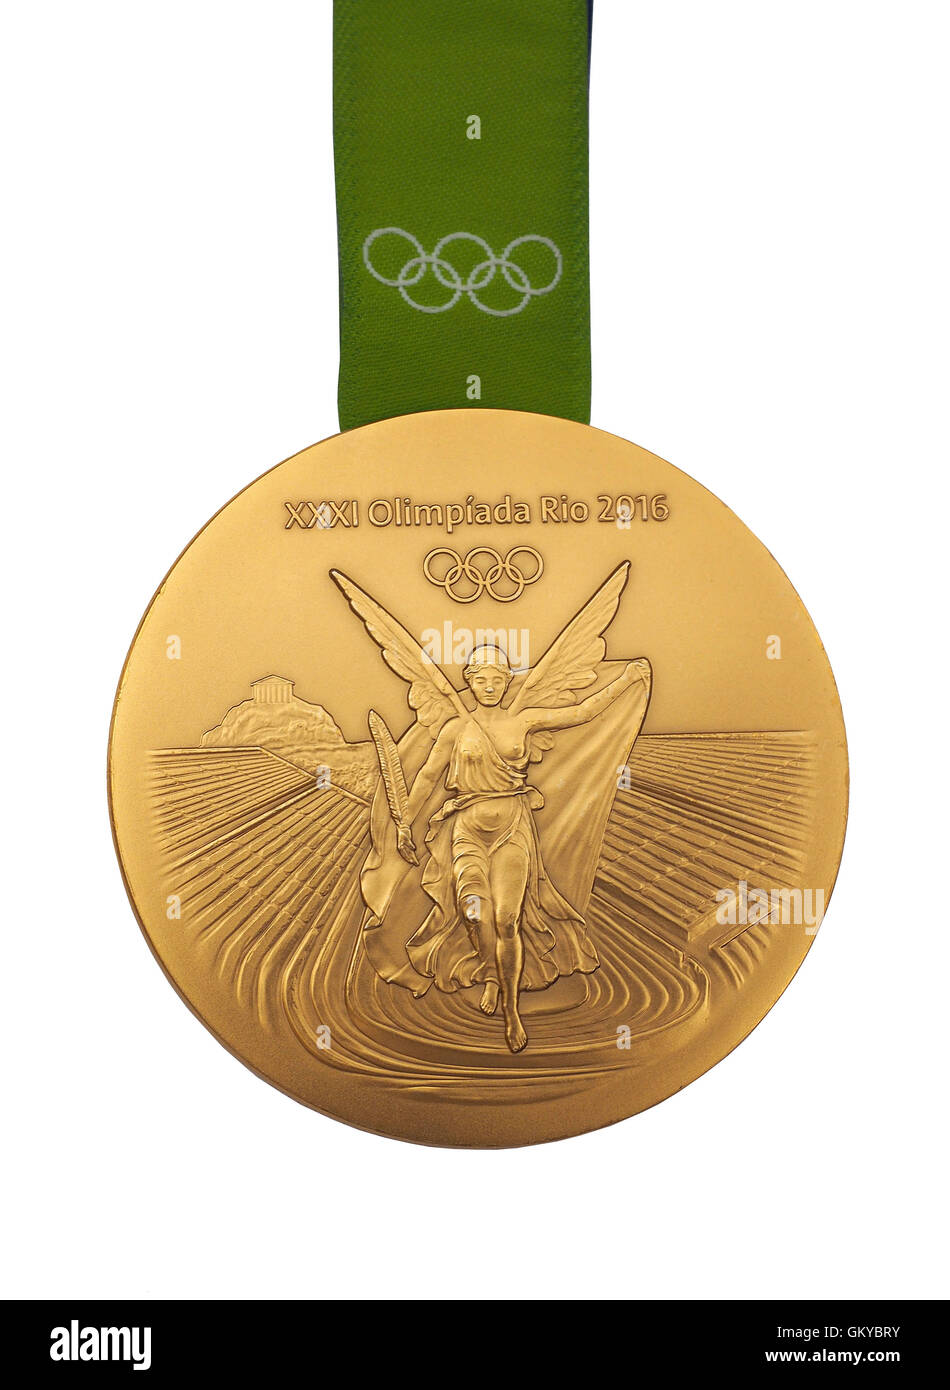 Olympic gold medal cut out -Fotos und -Bildmaterial in hoher Auflösung –  Alamy